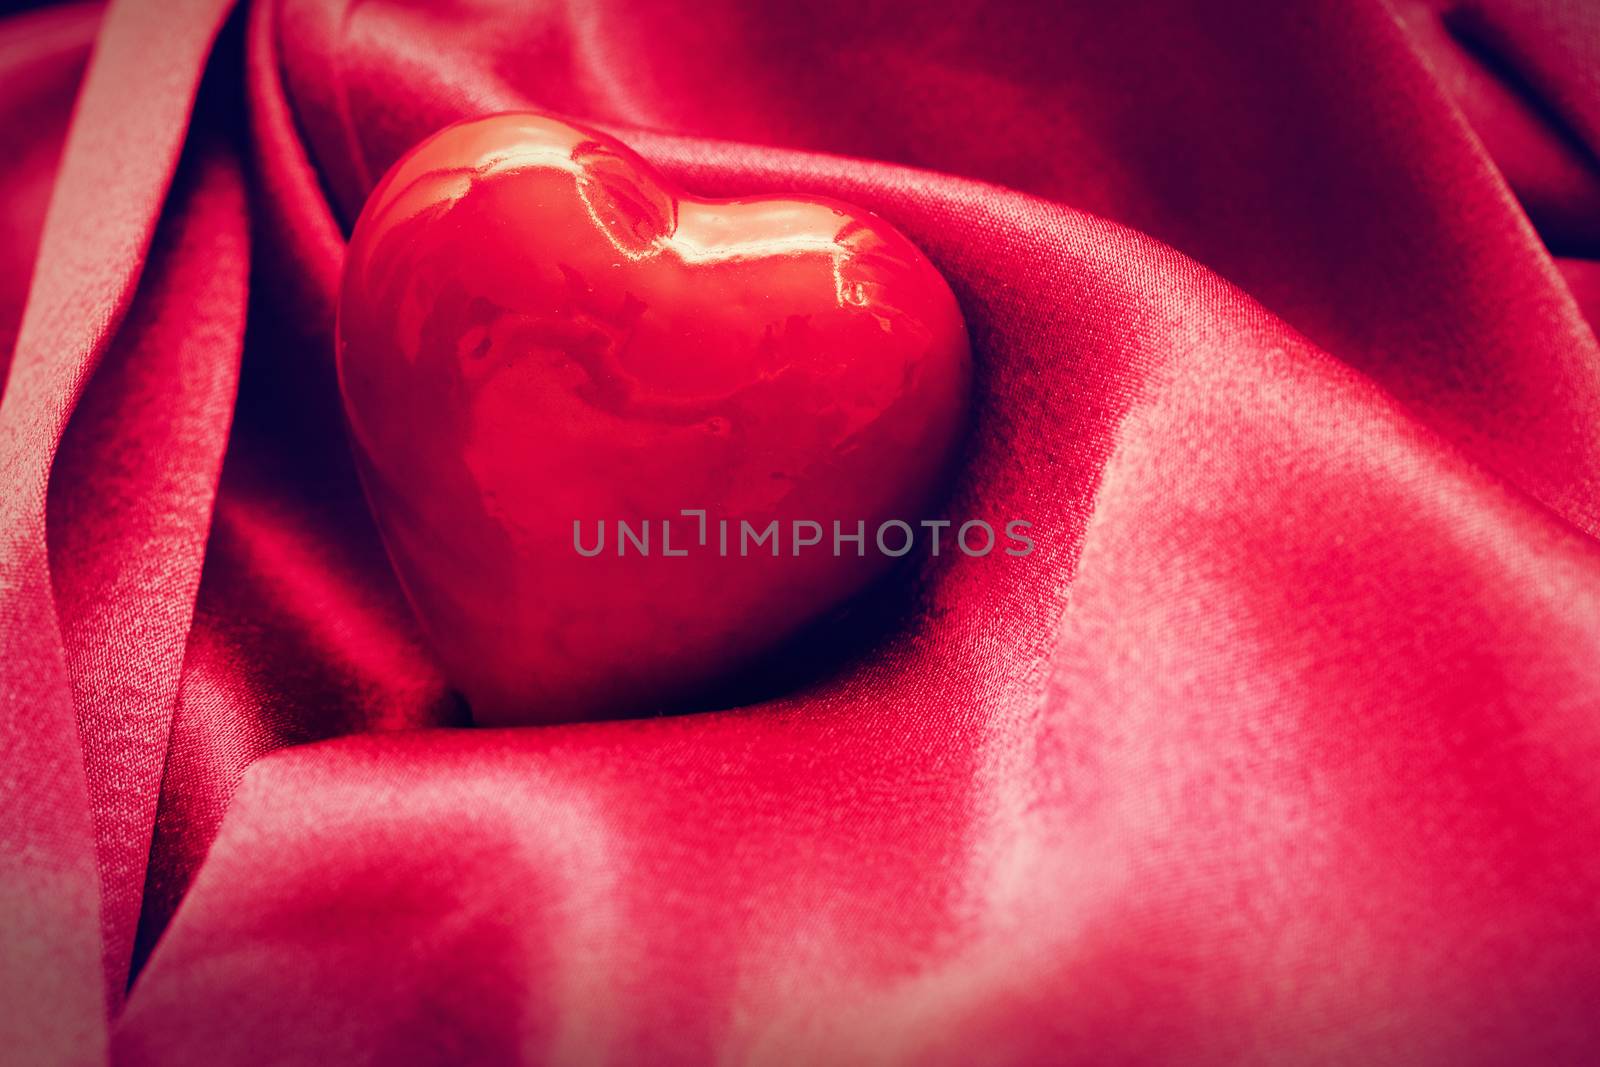 Red heart in satin cloth. Symbol of love, Valentine's Day background